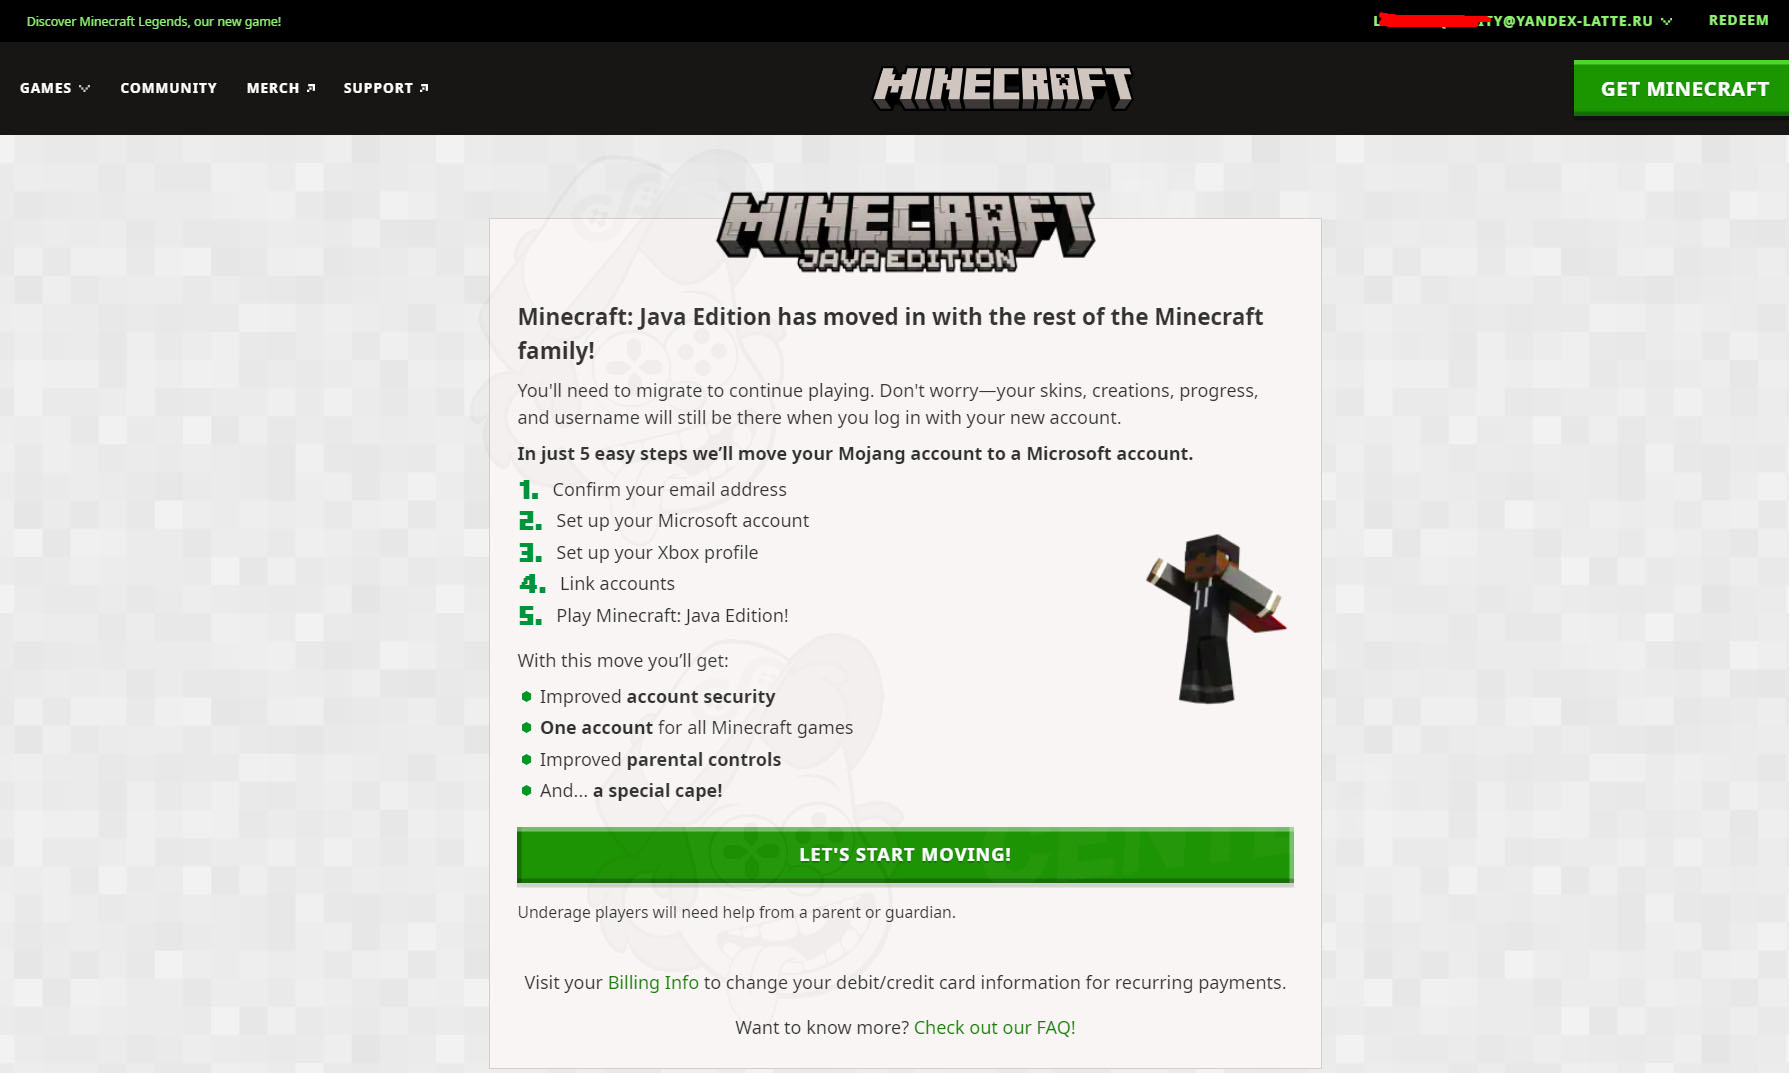 ✔️Minecraft Java EDT (Mojang. Ready for Migrate) +mail